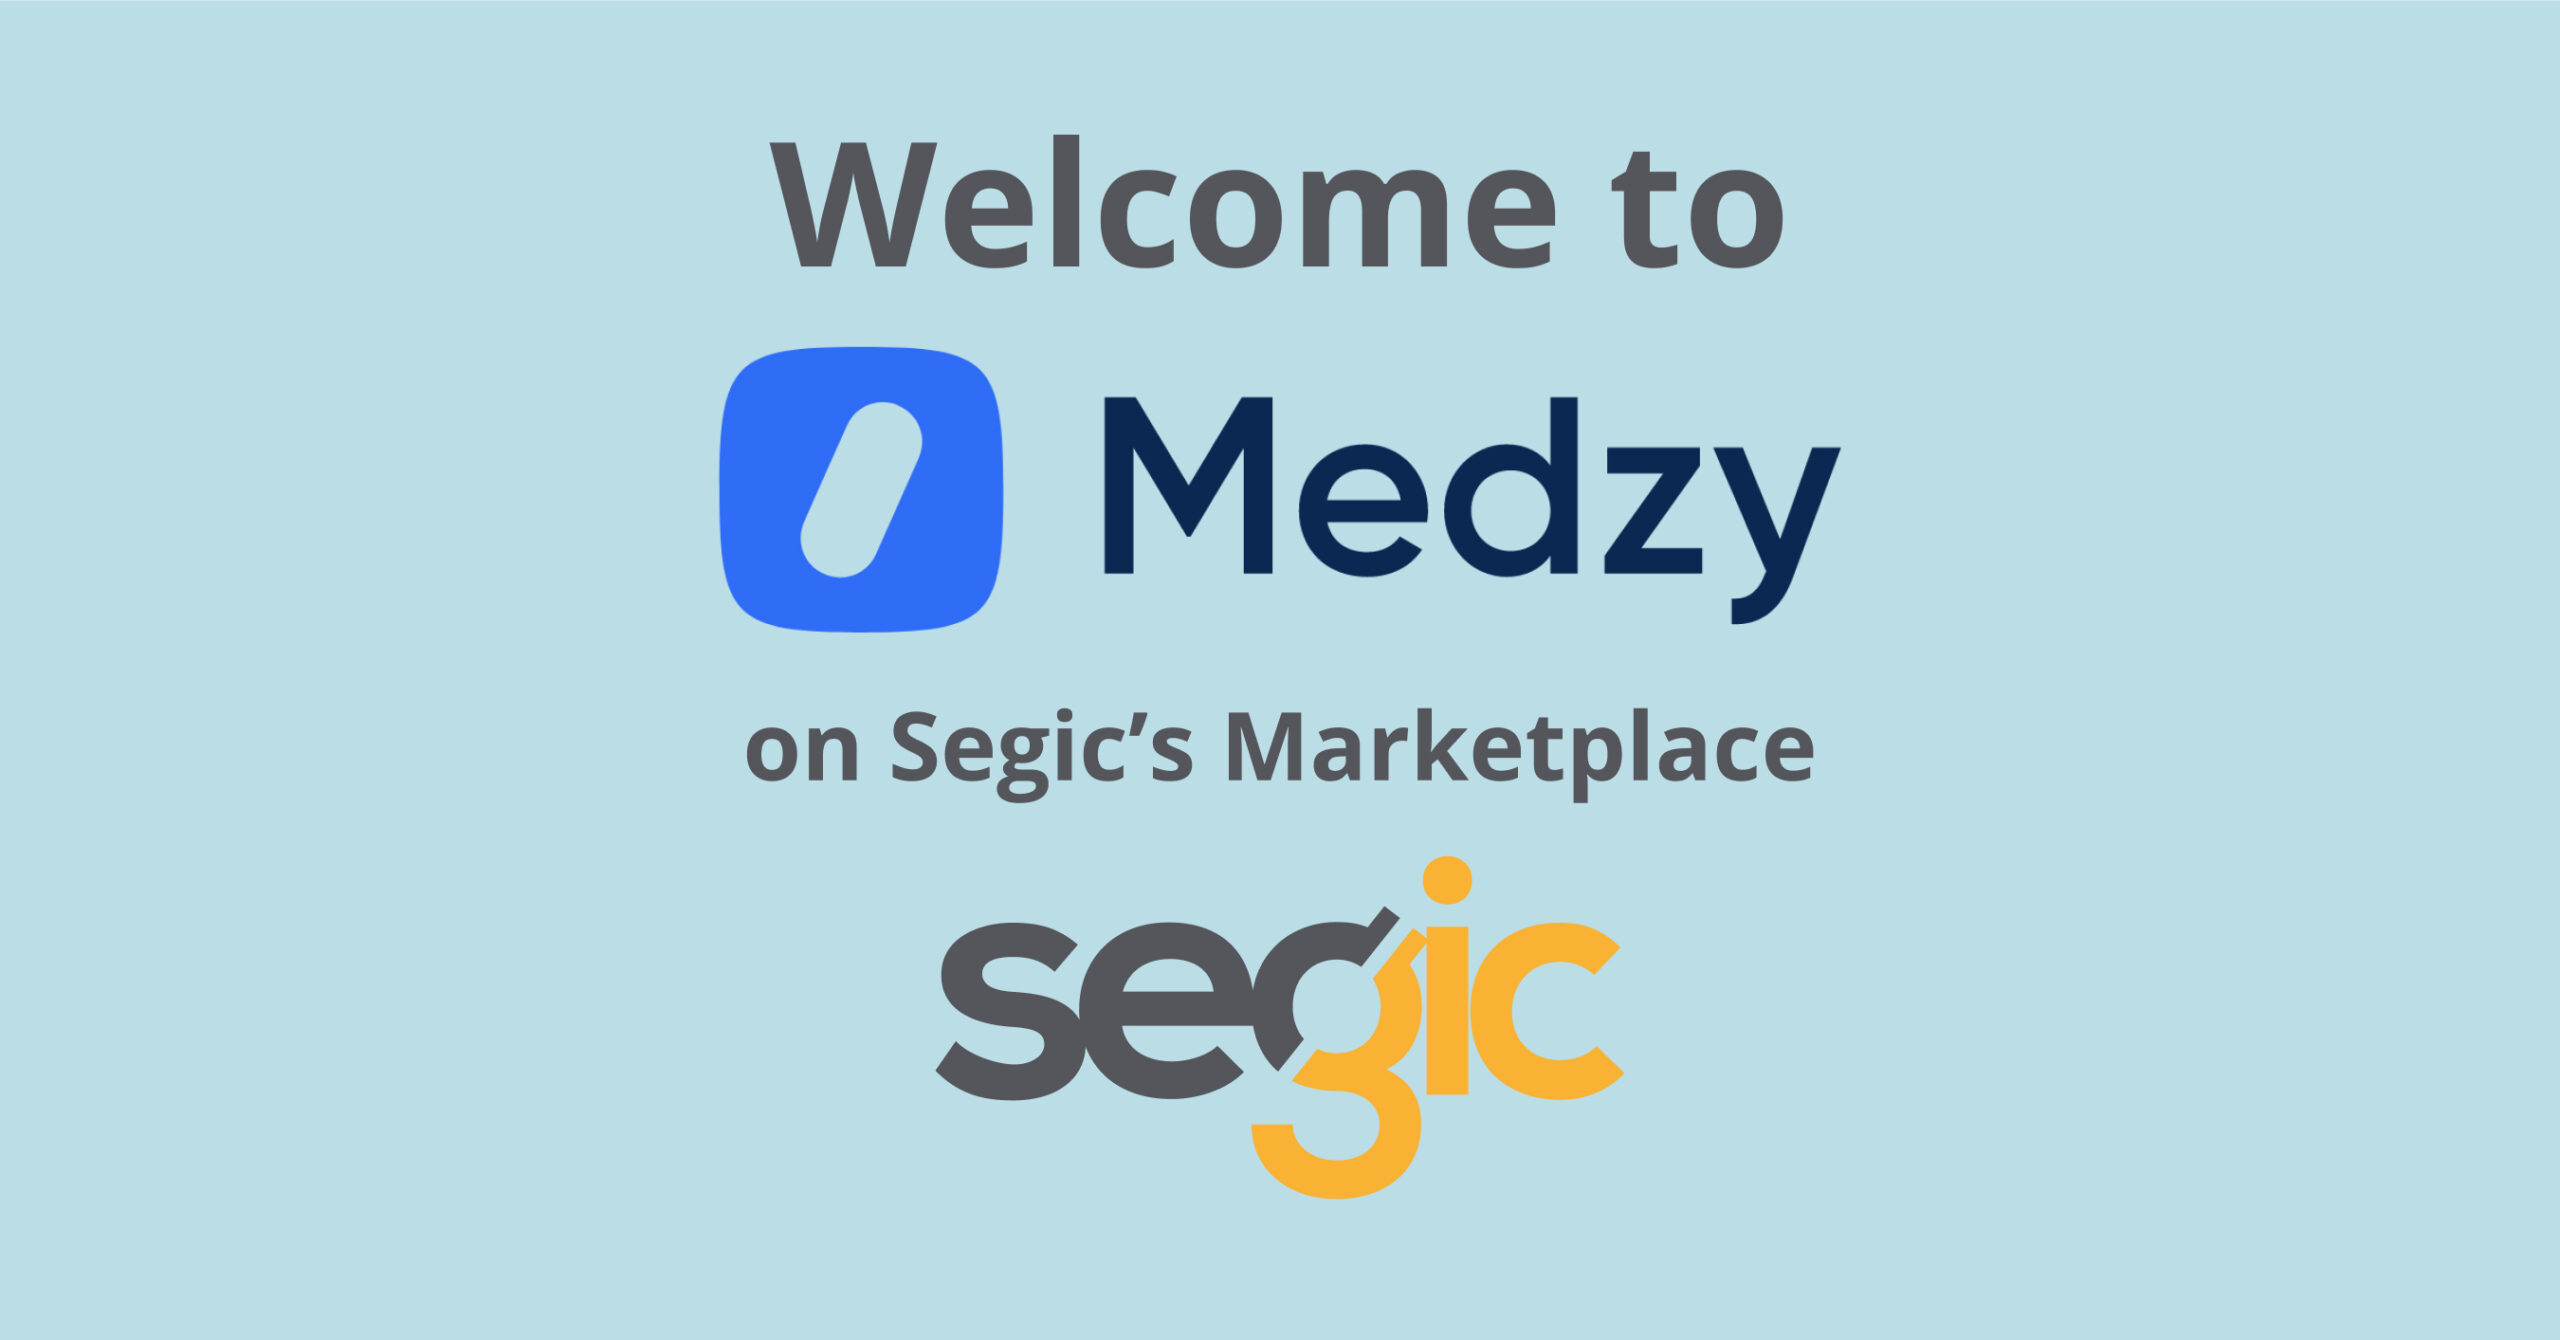 Medzy and Segic partner to deliver virtual health and wellness services on the Segic’s Benefits Marketplace